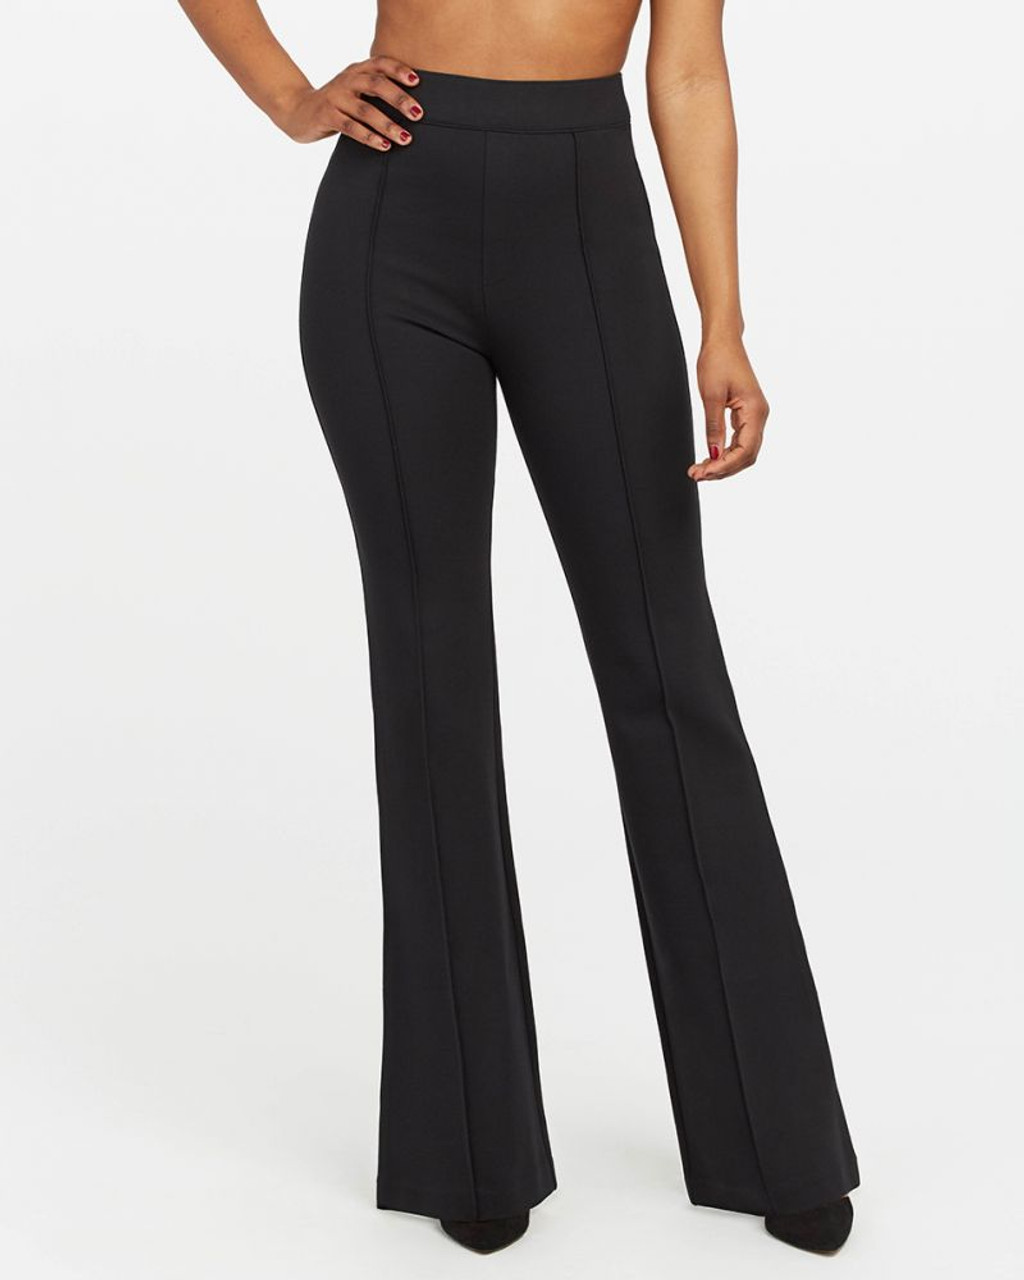 Perfect Black Pant Hi Rise Flare- Black - Monkee's of Raleigh